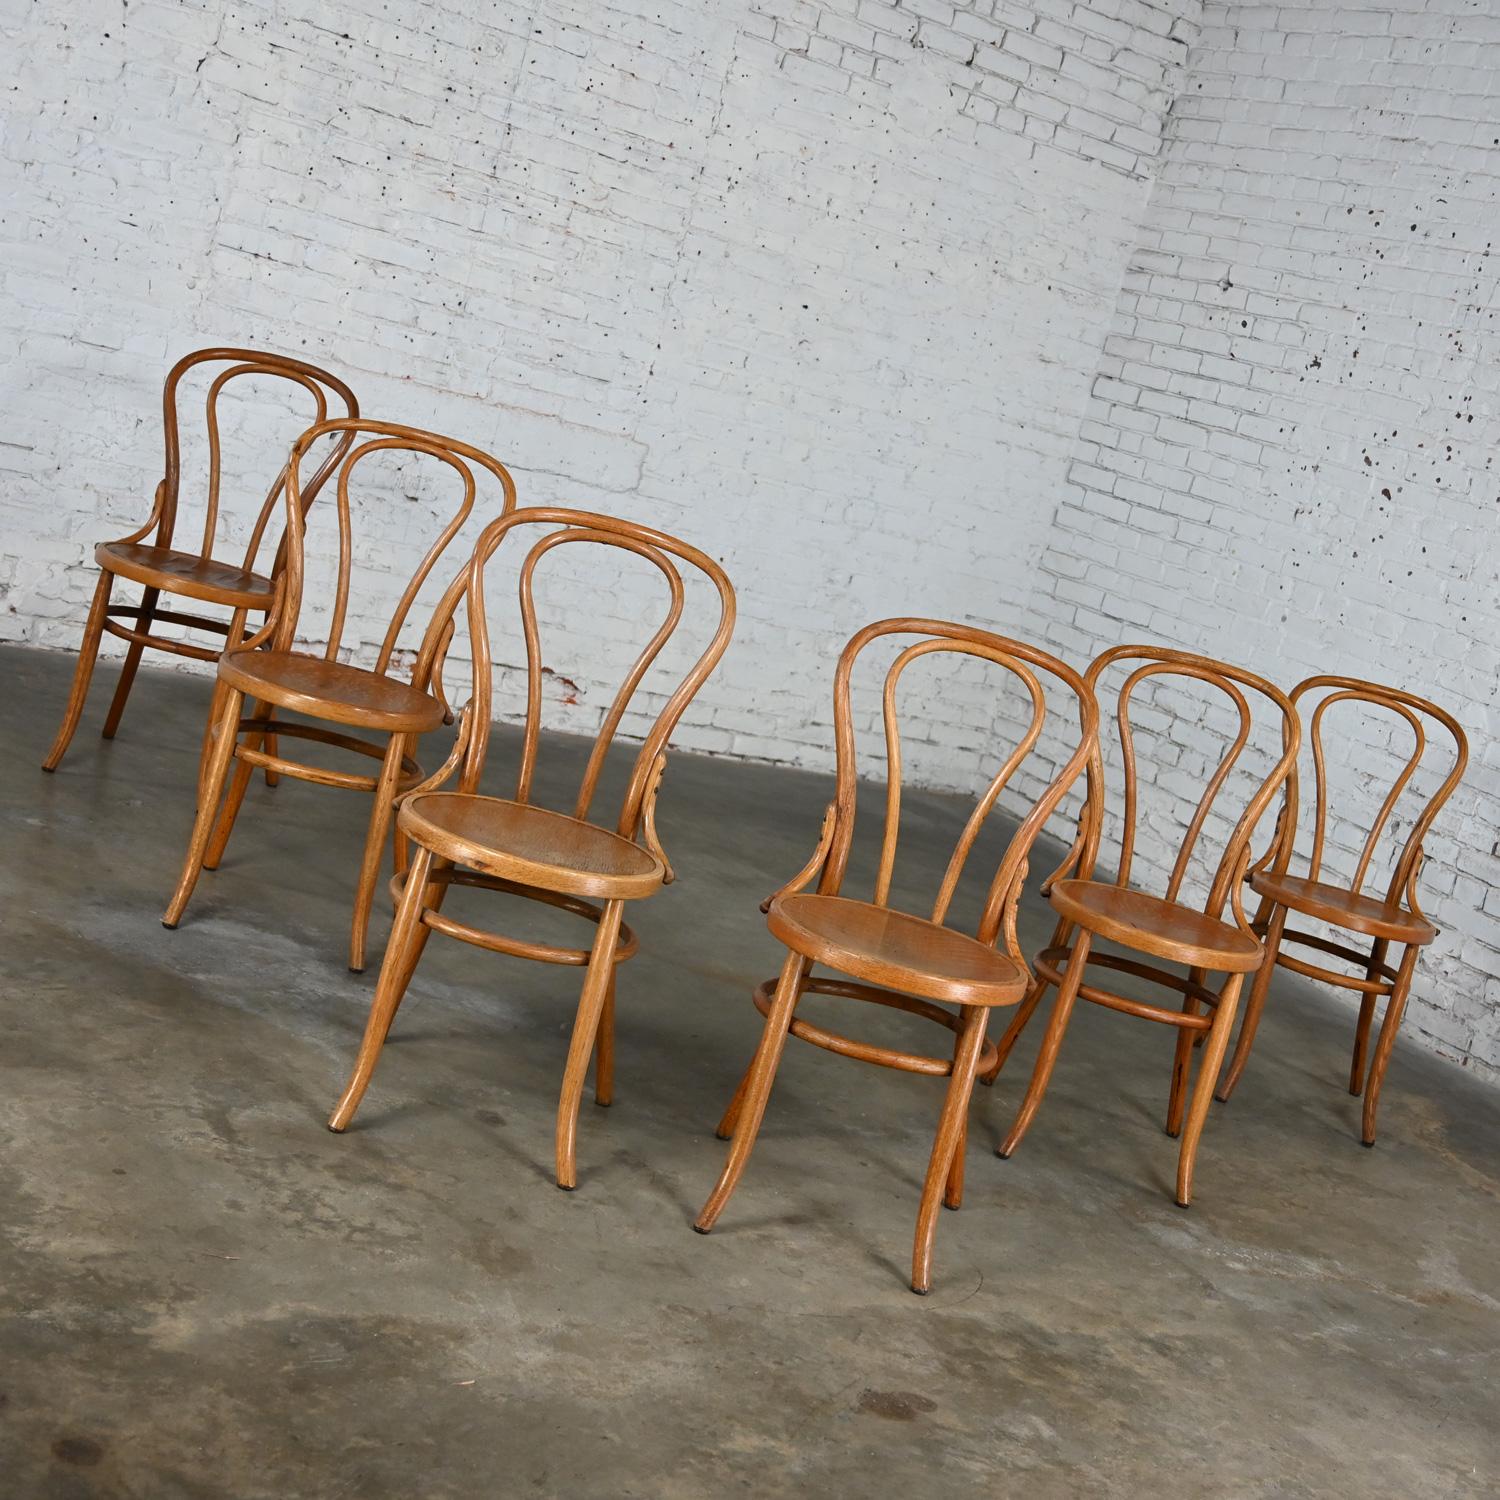 20th Century Bauhaus Oak Bentwood Chairs Attributed to Thonet #18 Café Chair Set of 6 For Sale